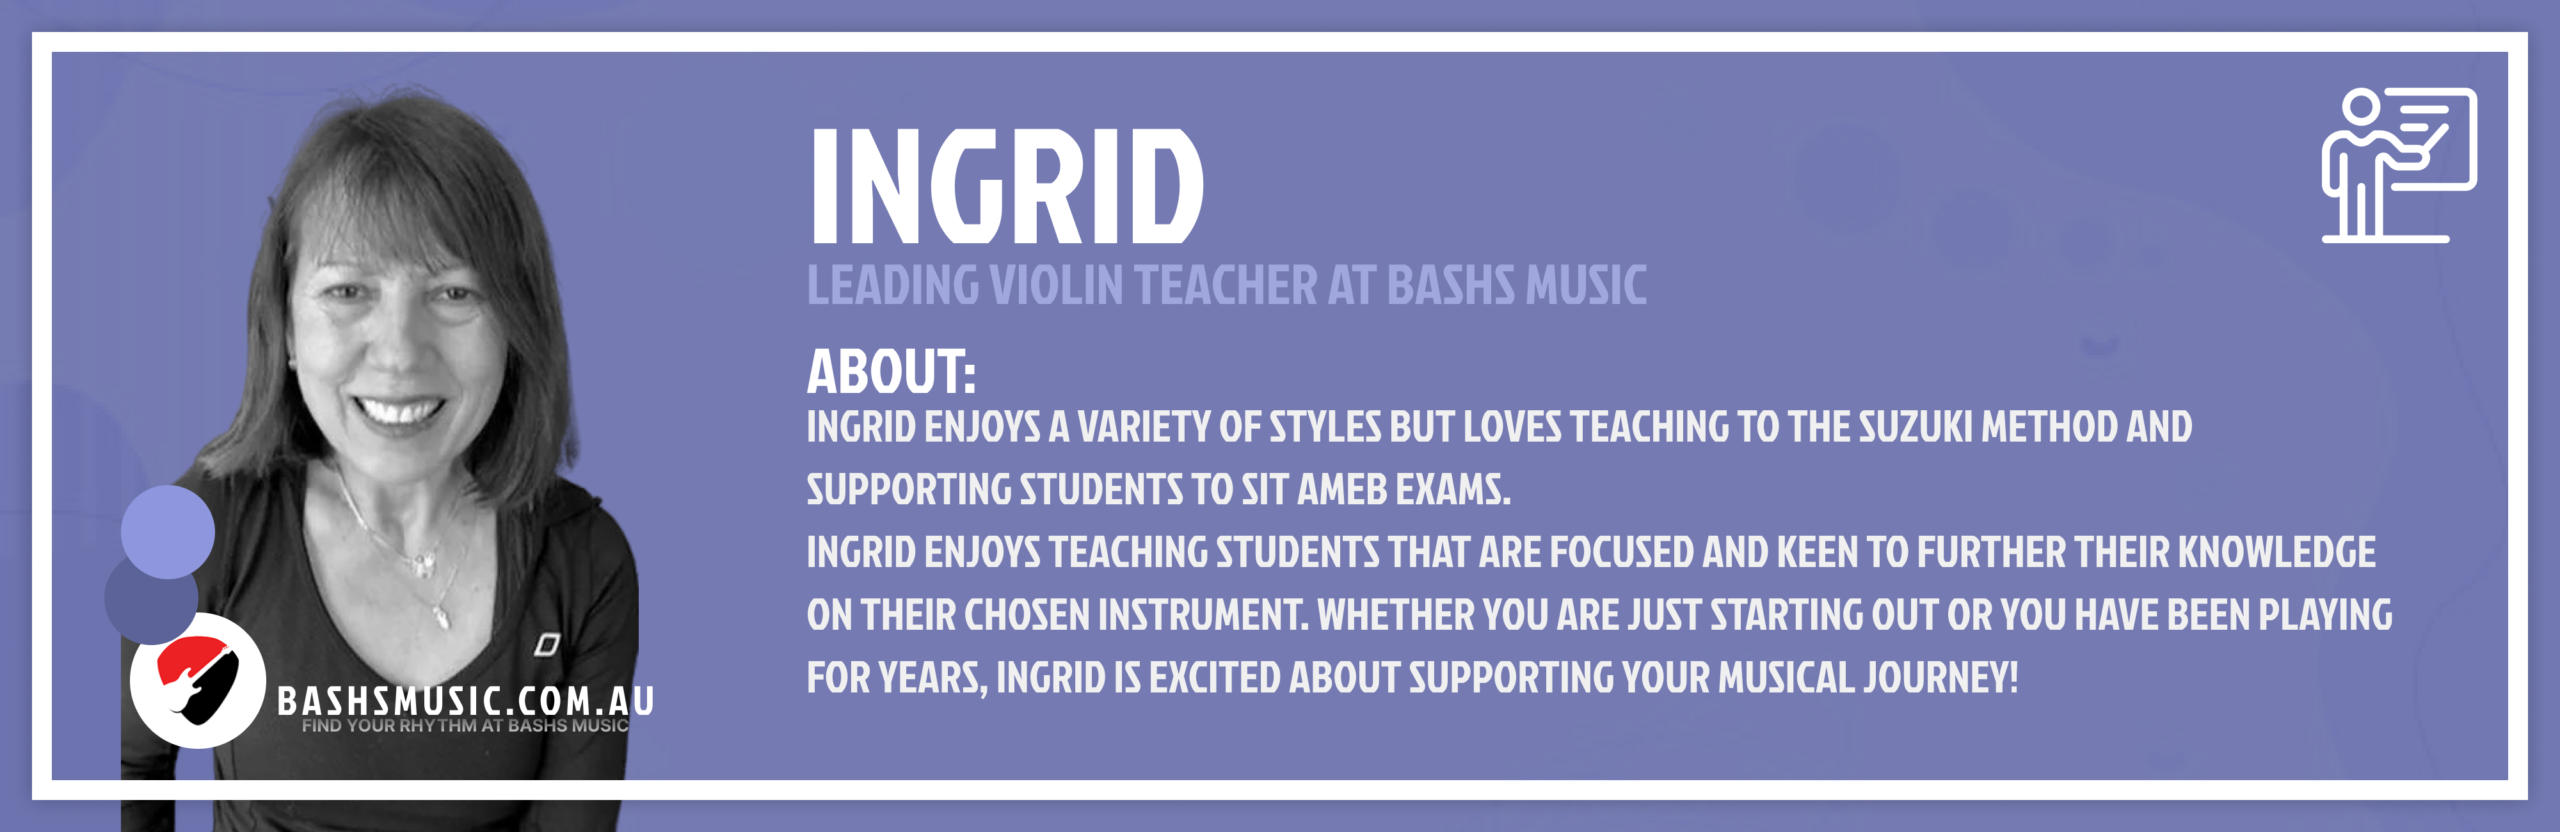 Ingrid. Leading Violin Teacher At Bashs Music. She enjoys a variety of styles but loves teaching to the Suzuki Method and supporting students to sit AMEB Exams. Ingrid enjoys teaching students that are focused and keen to further their knowledge on their chosen instrument. Whether you are just starting out or you have been playing for years, Ingrid is excited about supporting your musical journey!